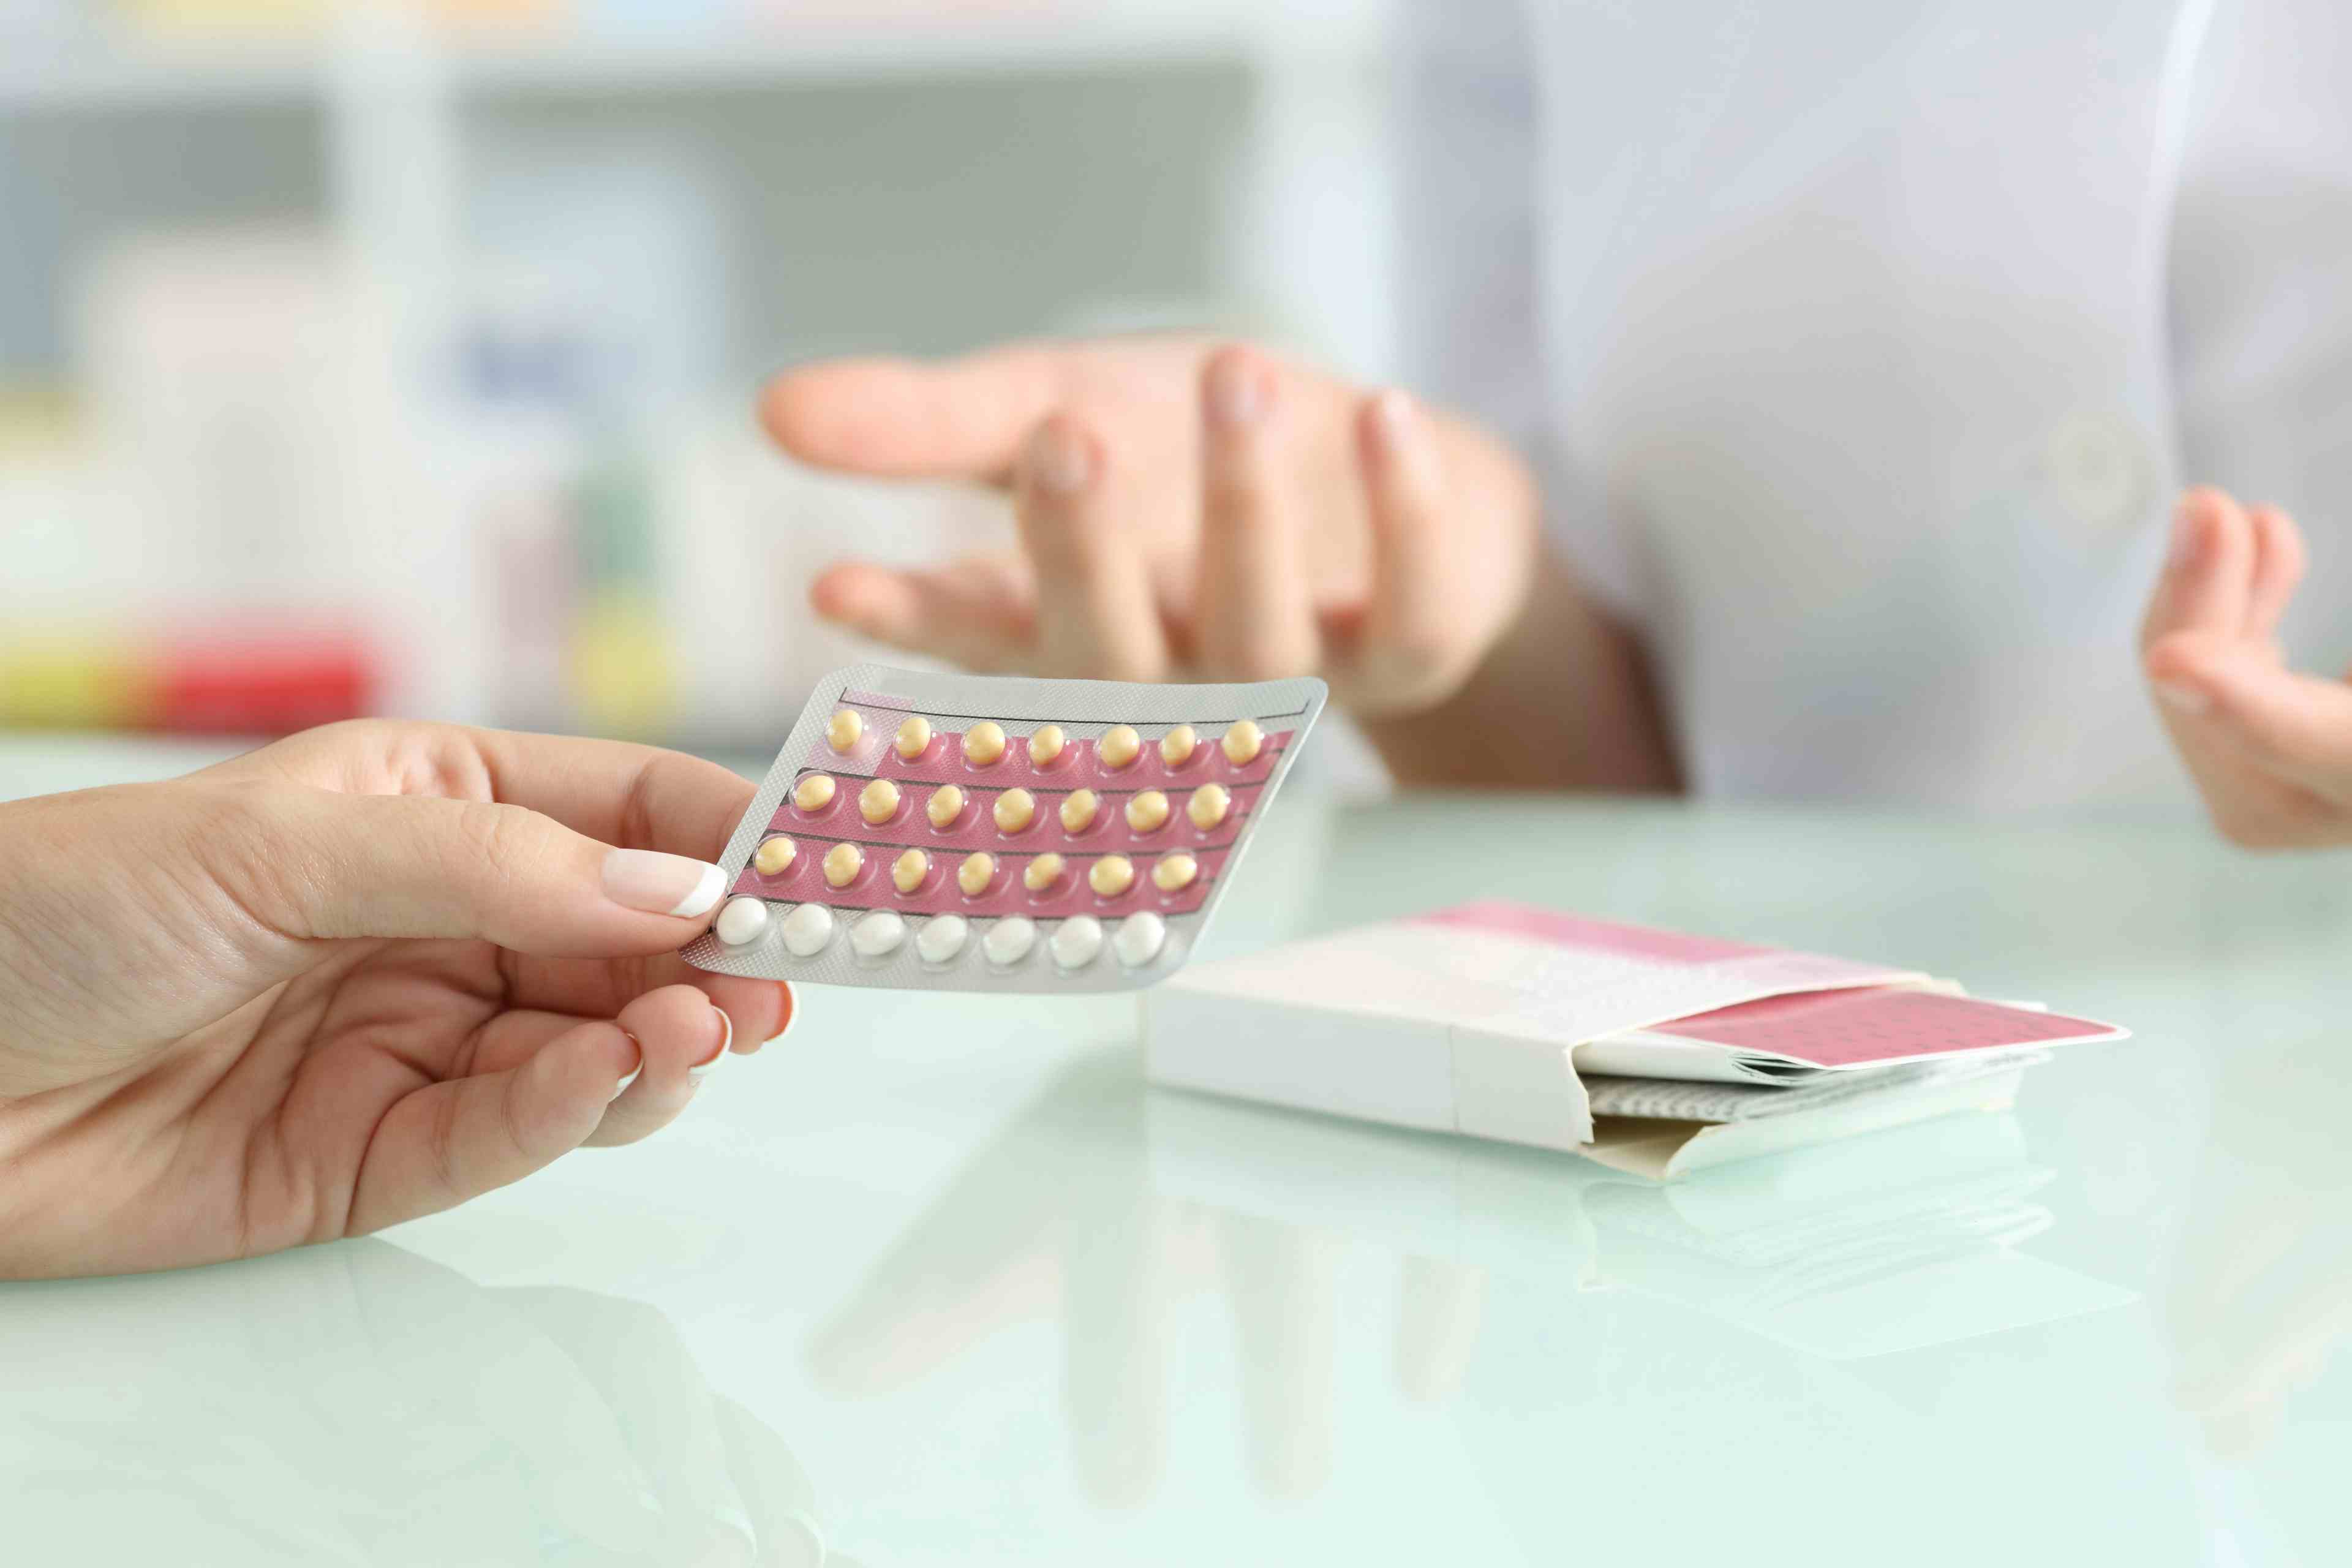 Women buying contraceptive pills in the pharmacy | Image credit: Antonioguillem - stock.adobe.com